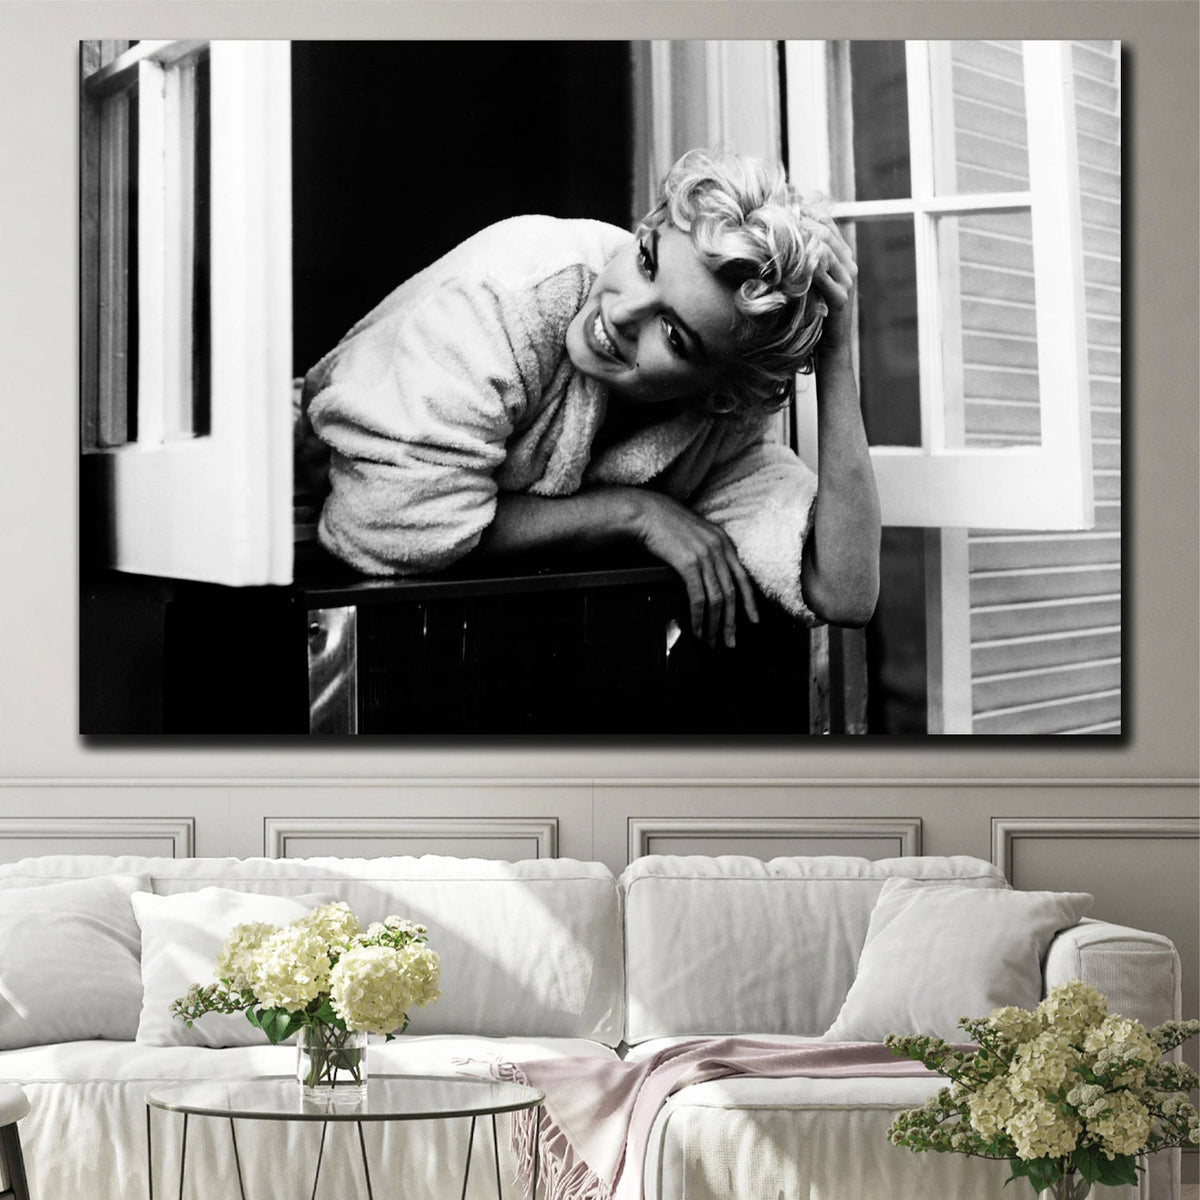 https://cdn.shopify.com/s/files/1/0387/9986/8044/products/MarilynMagicCanvasArtprintStretched-1.jpg